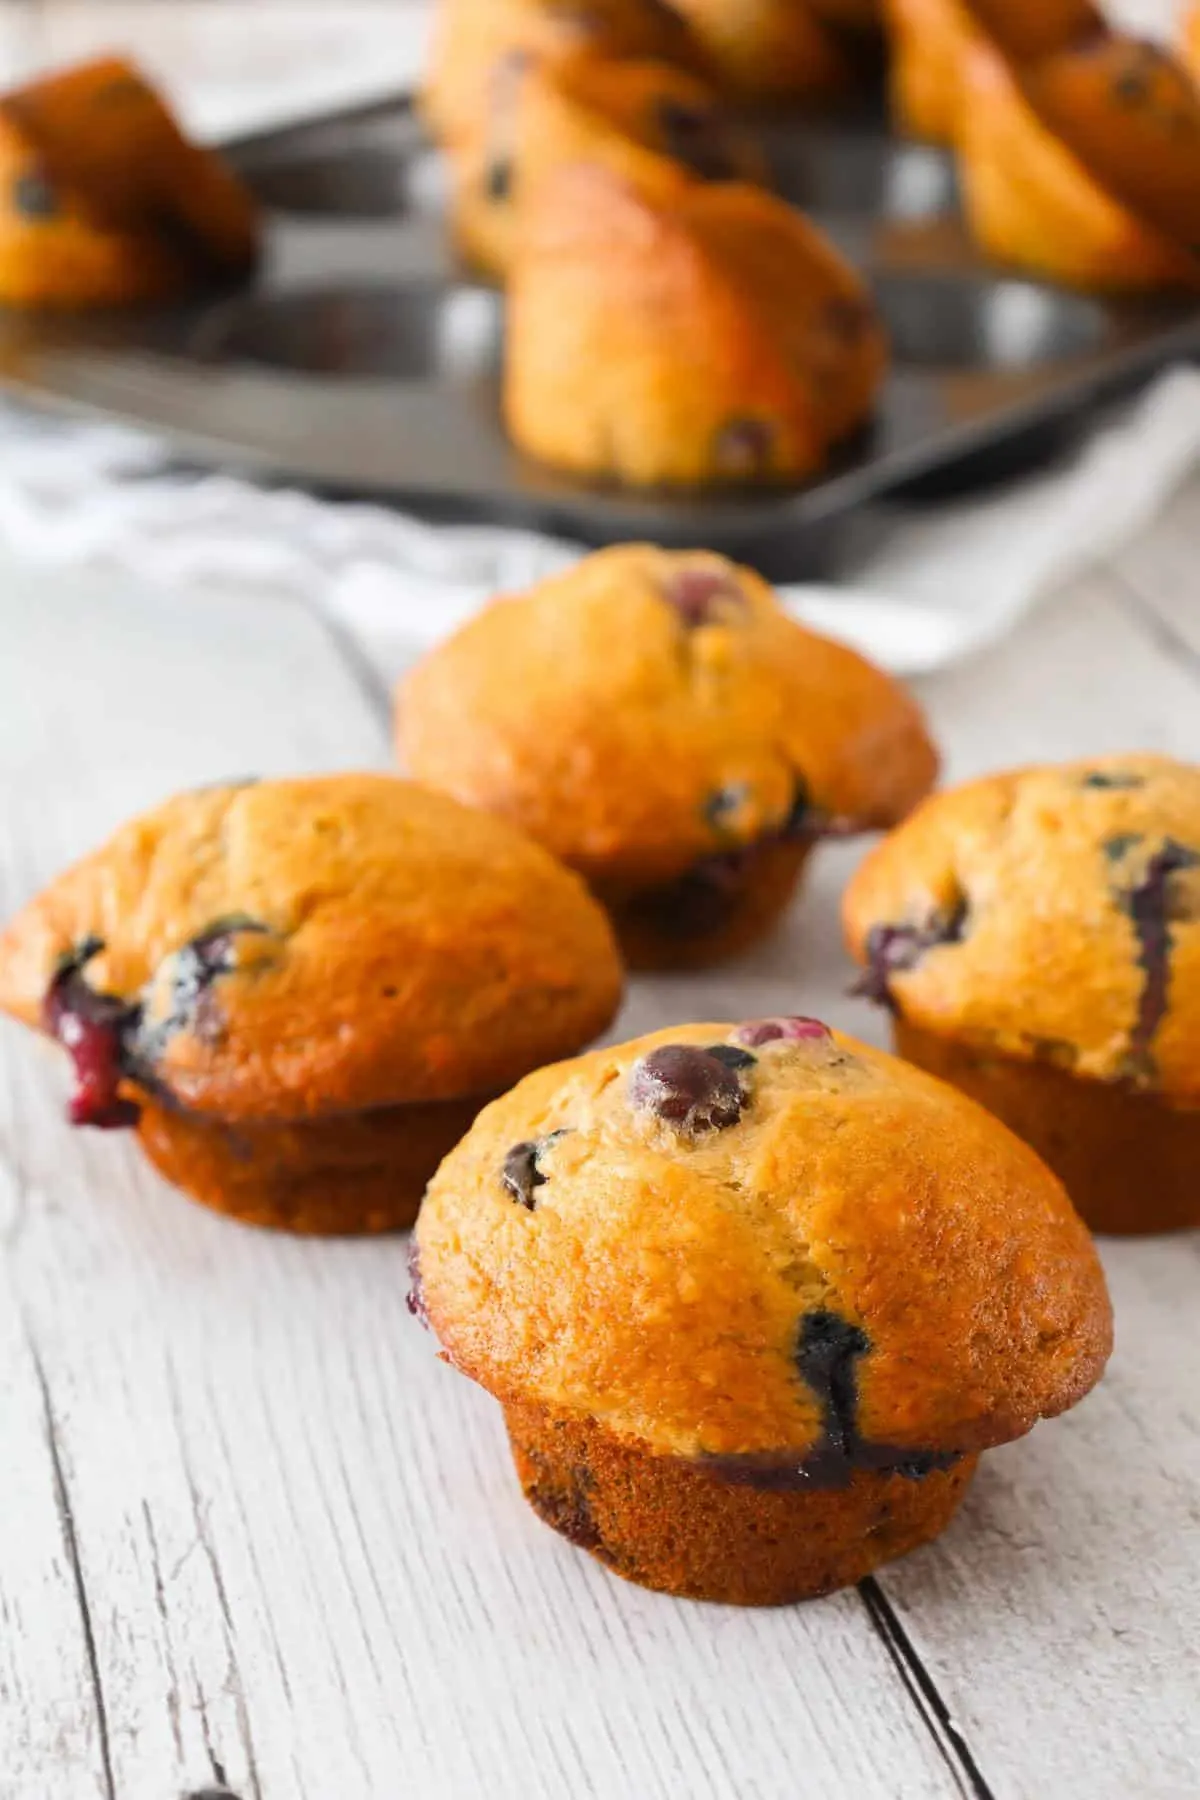 Banana Blueberry Muffins are moist and delicious homemade banana muffins loaded with fresh blueberries.